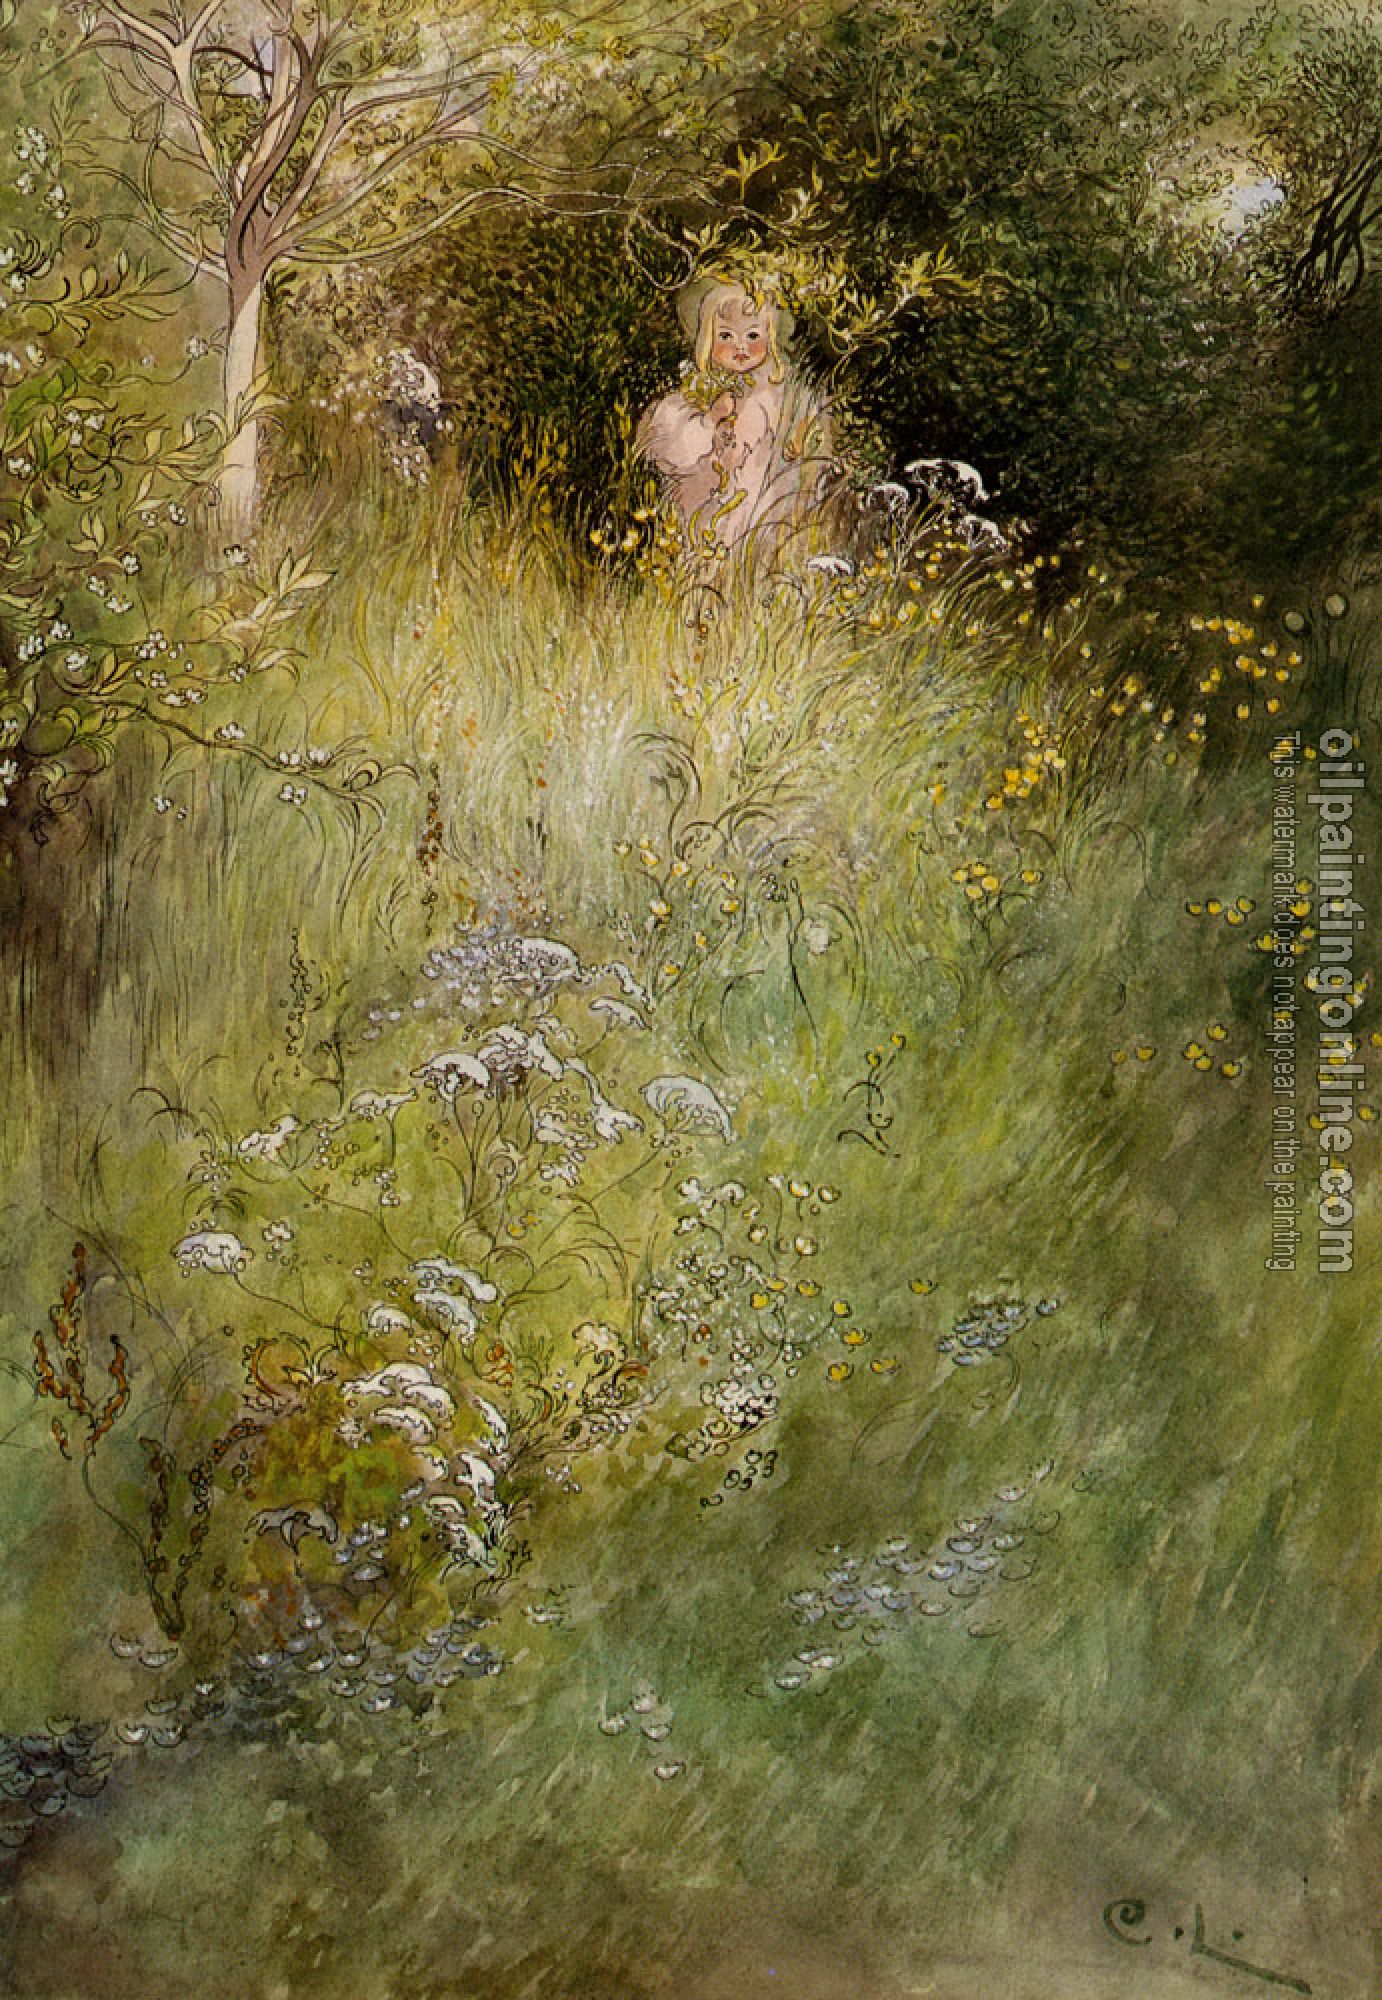 Larsson, Carl - A Fairy, or Kersti, and a View of a Meadow